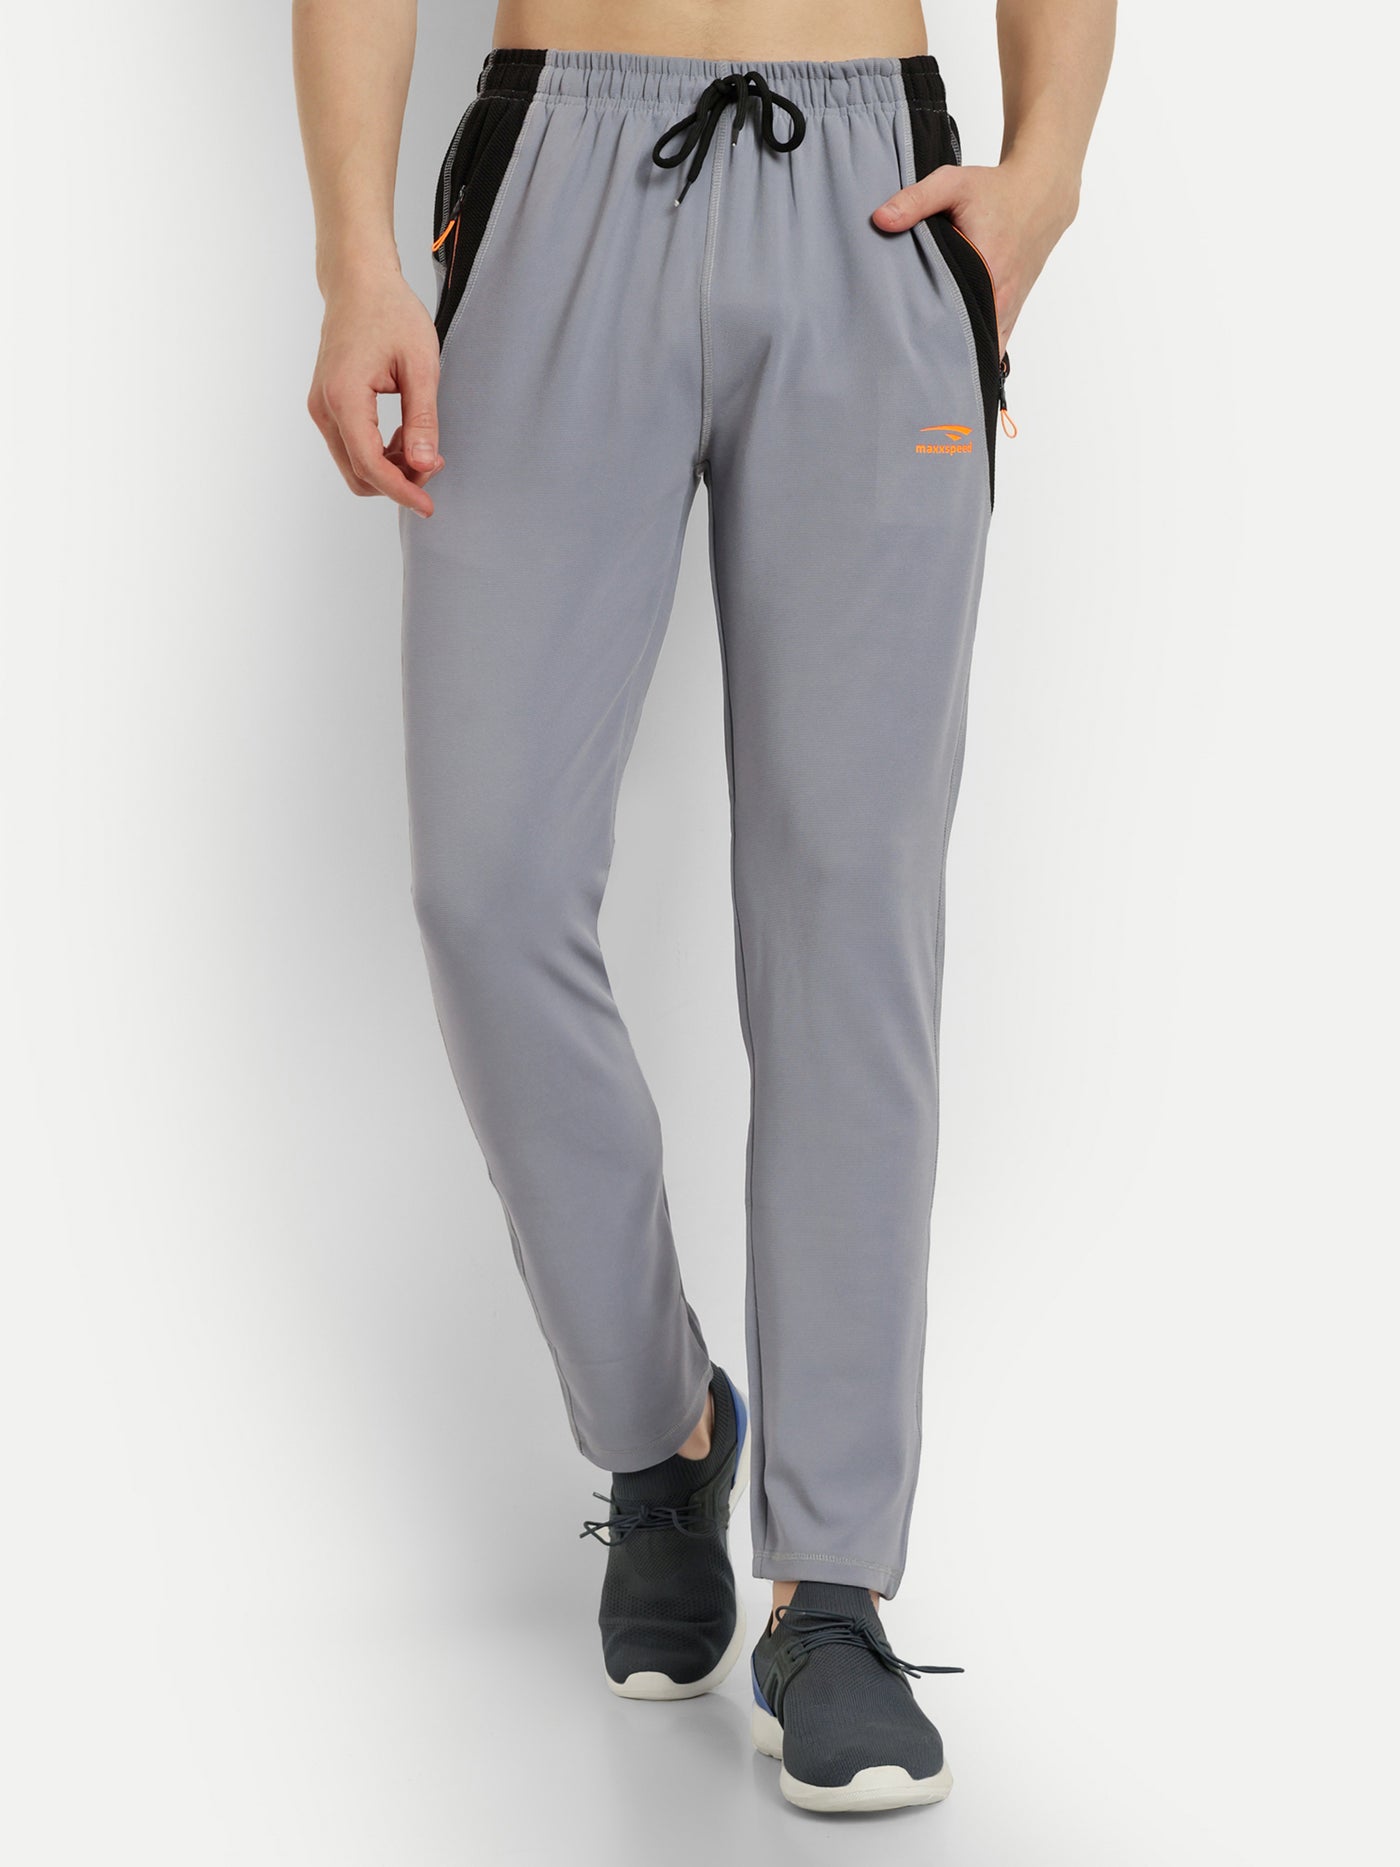 SPUNK by fbb Solid Men Grey Track Pants - Buy SPUNK by fbb Solid Men Grey Track  Pants Online at Best Prices in India | Flipkart.com